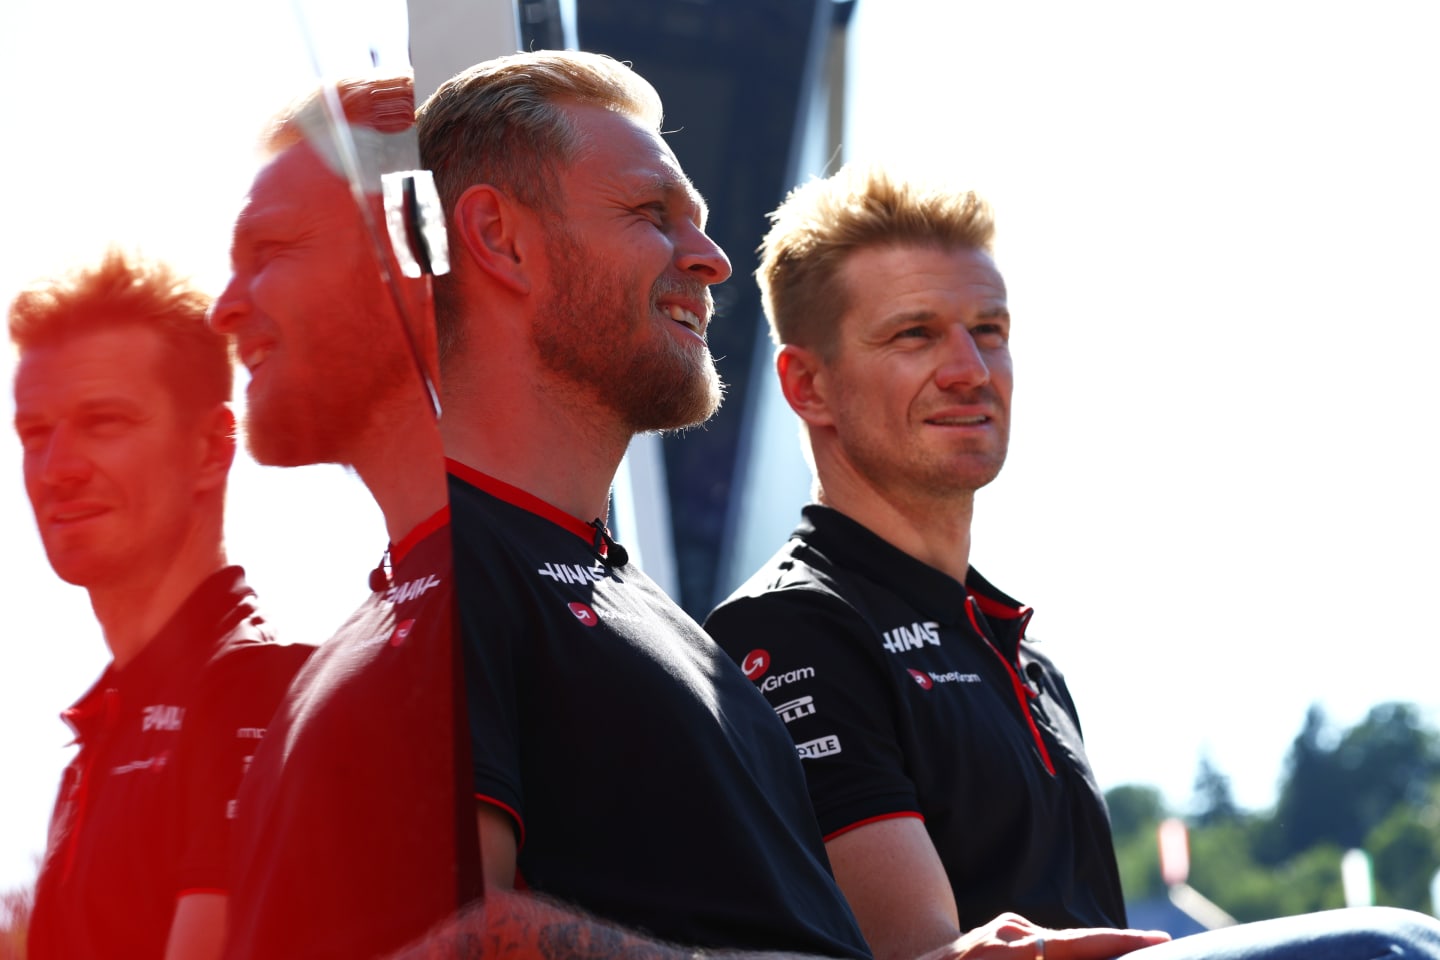 SPIELBERG, AUSTRIA - JUNE 29: Kevin Magnussen of Denmark and Haas F1 and Nico Hulkenberg of Germany